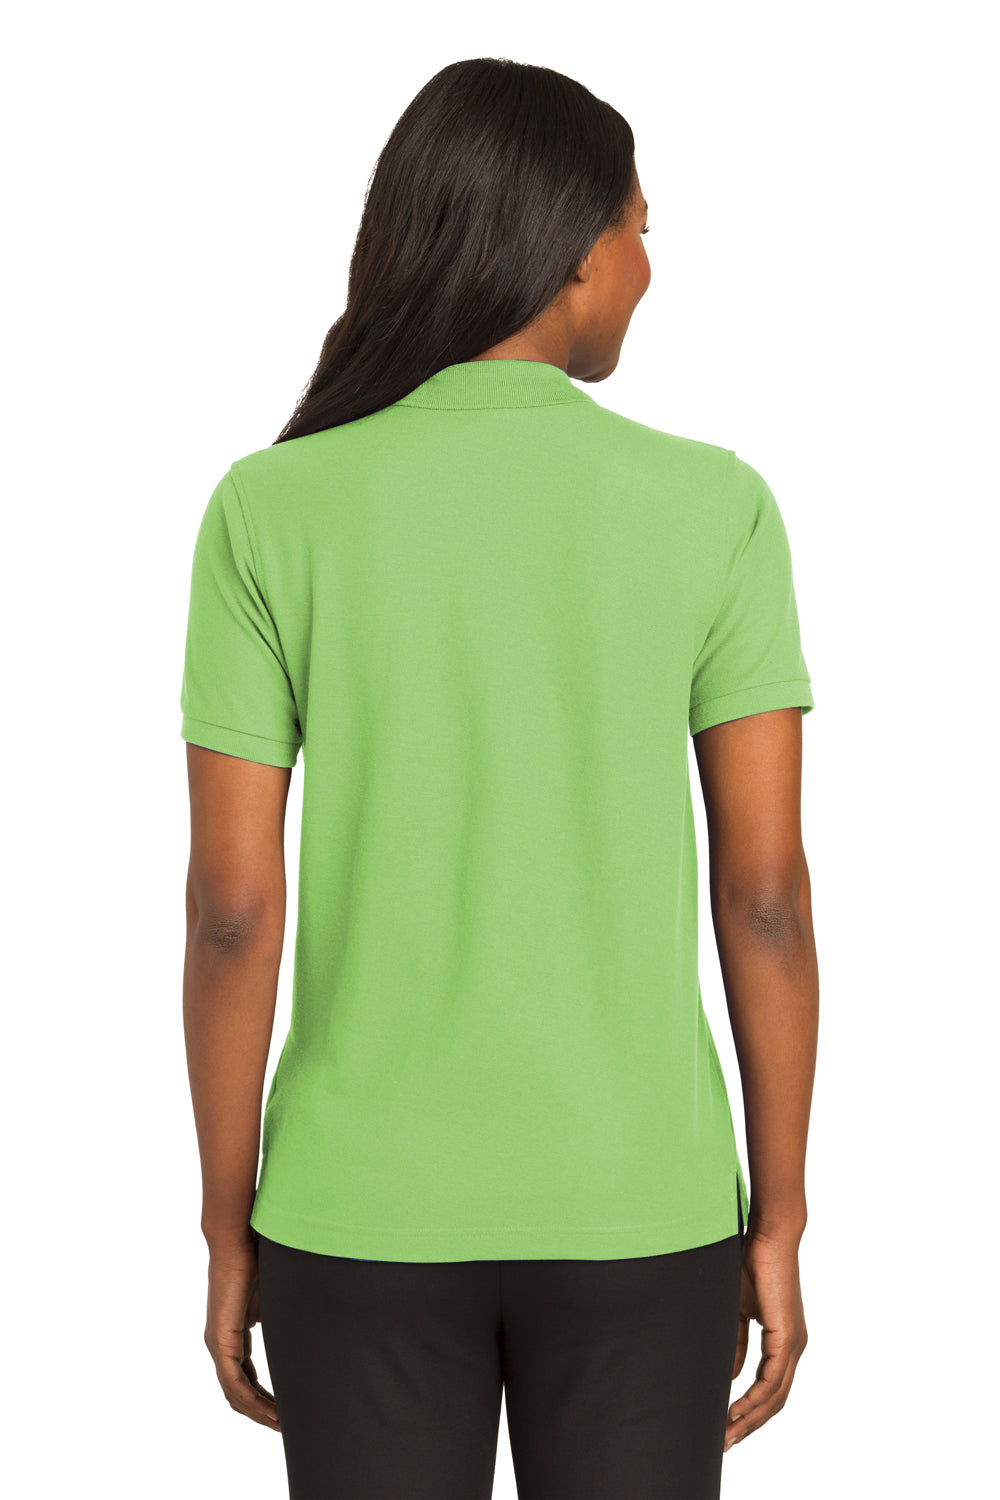 Port Authority L500 Womens Silk Touch Wrinkle Resistant Short Sleeve Polo Shirt Lime Green Back